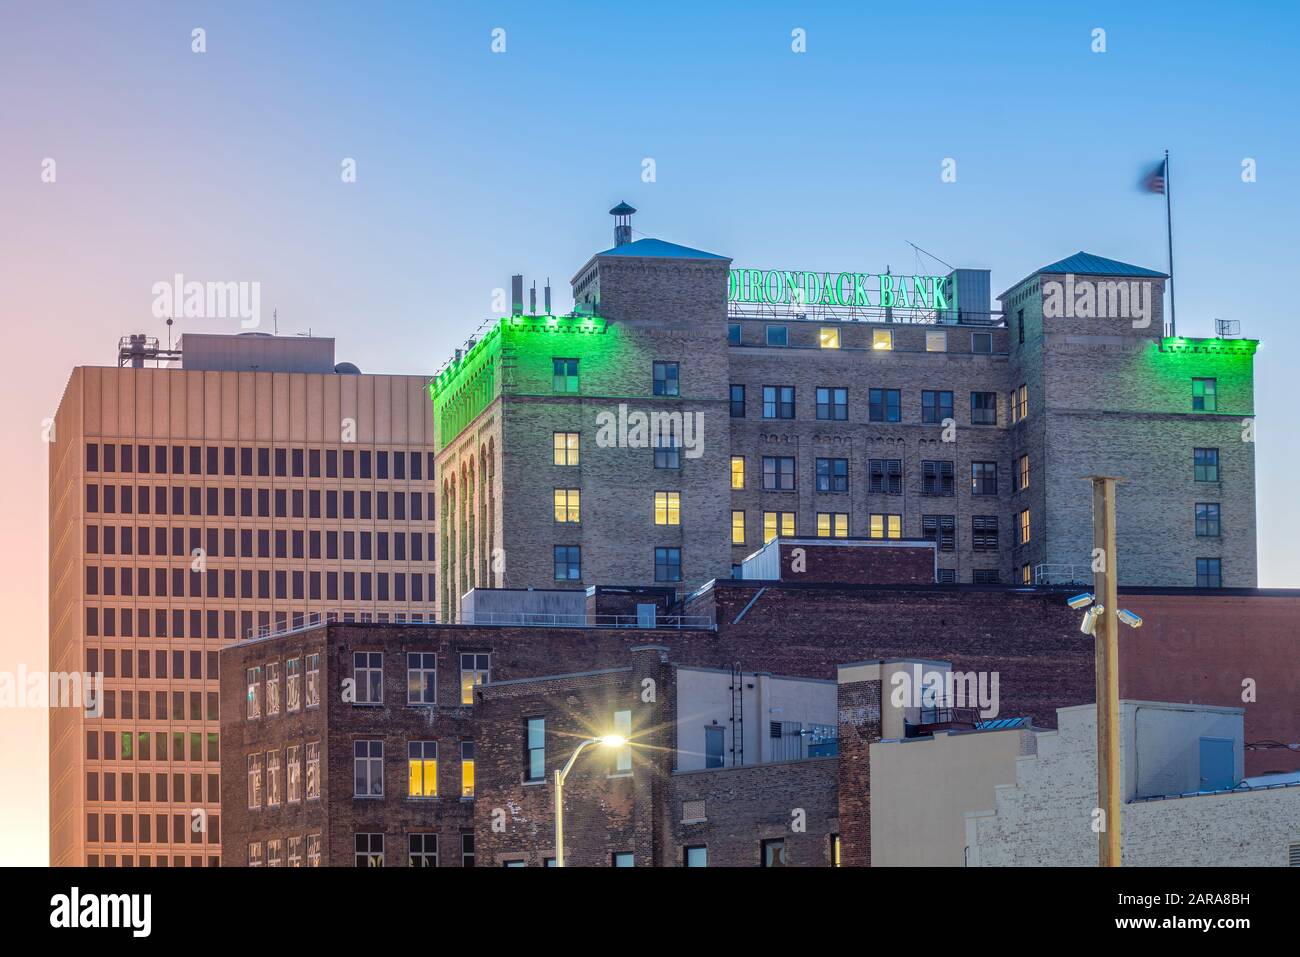 UTICA, NEW YORK - JAN 20. 2020 Closeup View of Adirondack Bank Tower at Sunset, Headquartered in downtown Utica. Stock Photo